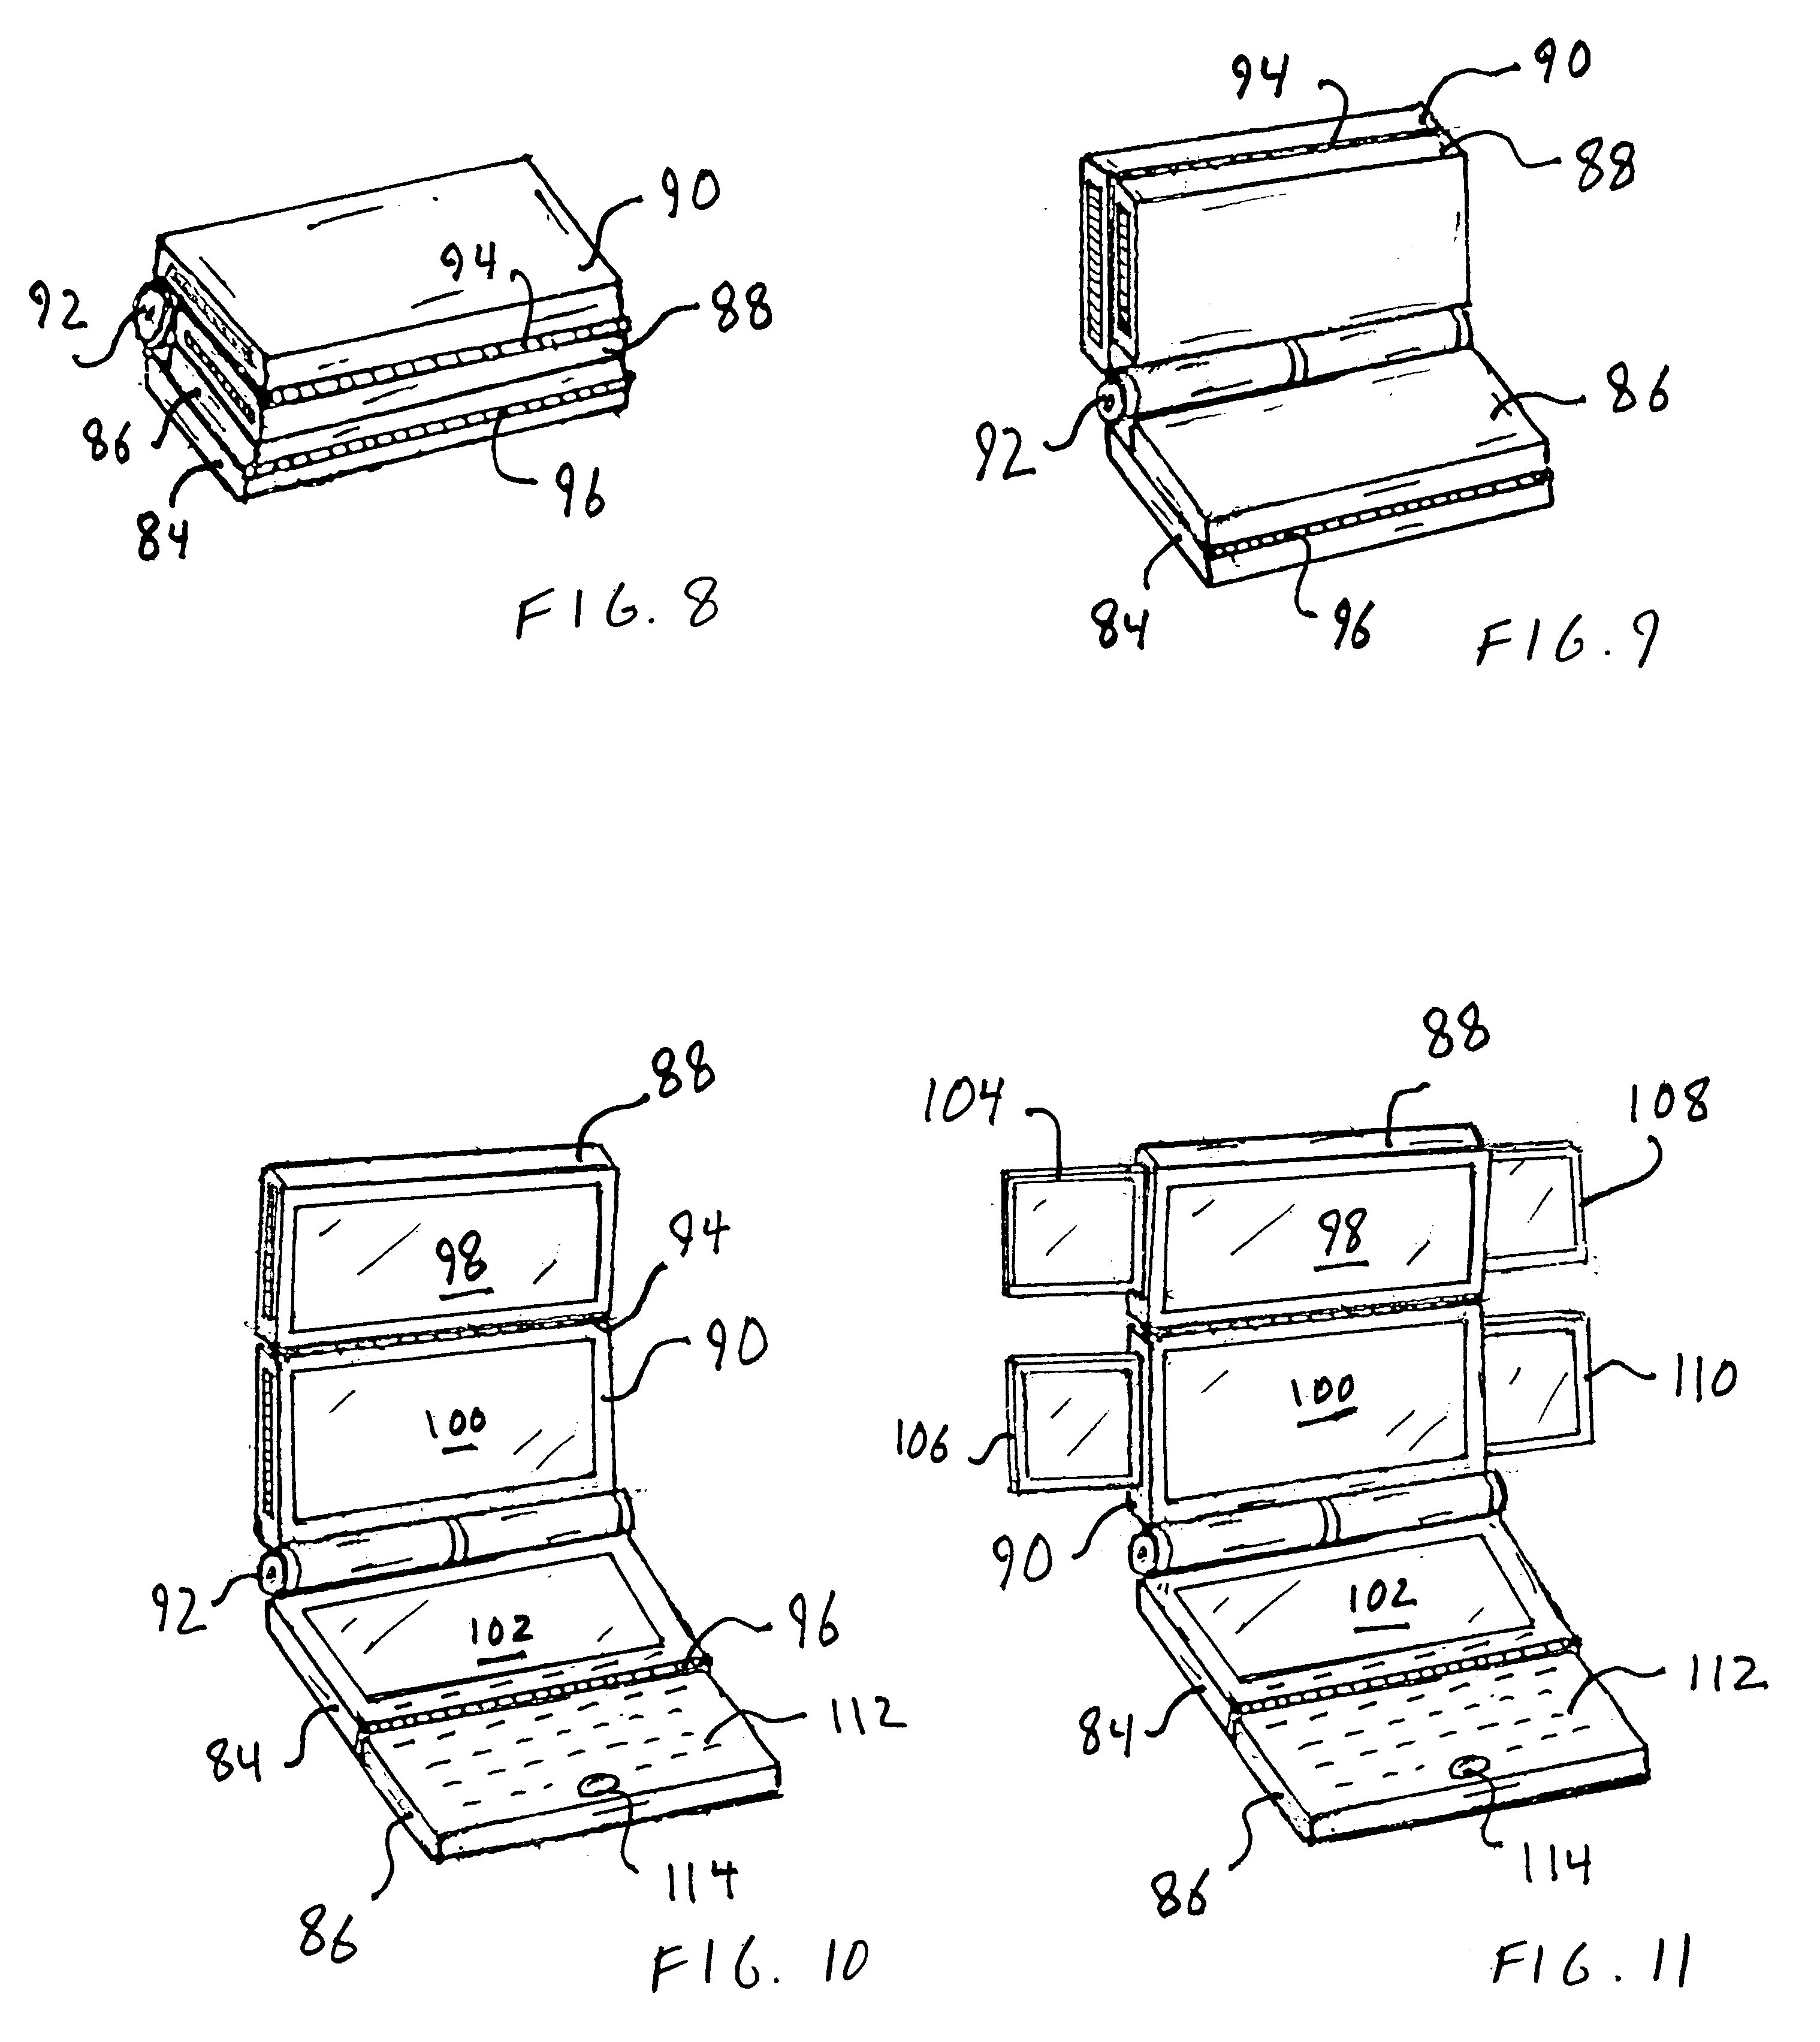 Multiple display portable computing devices